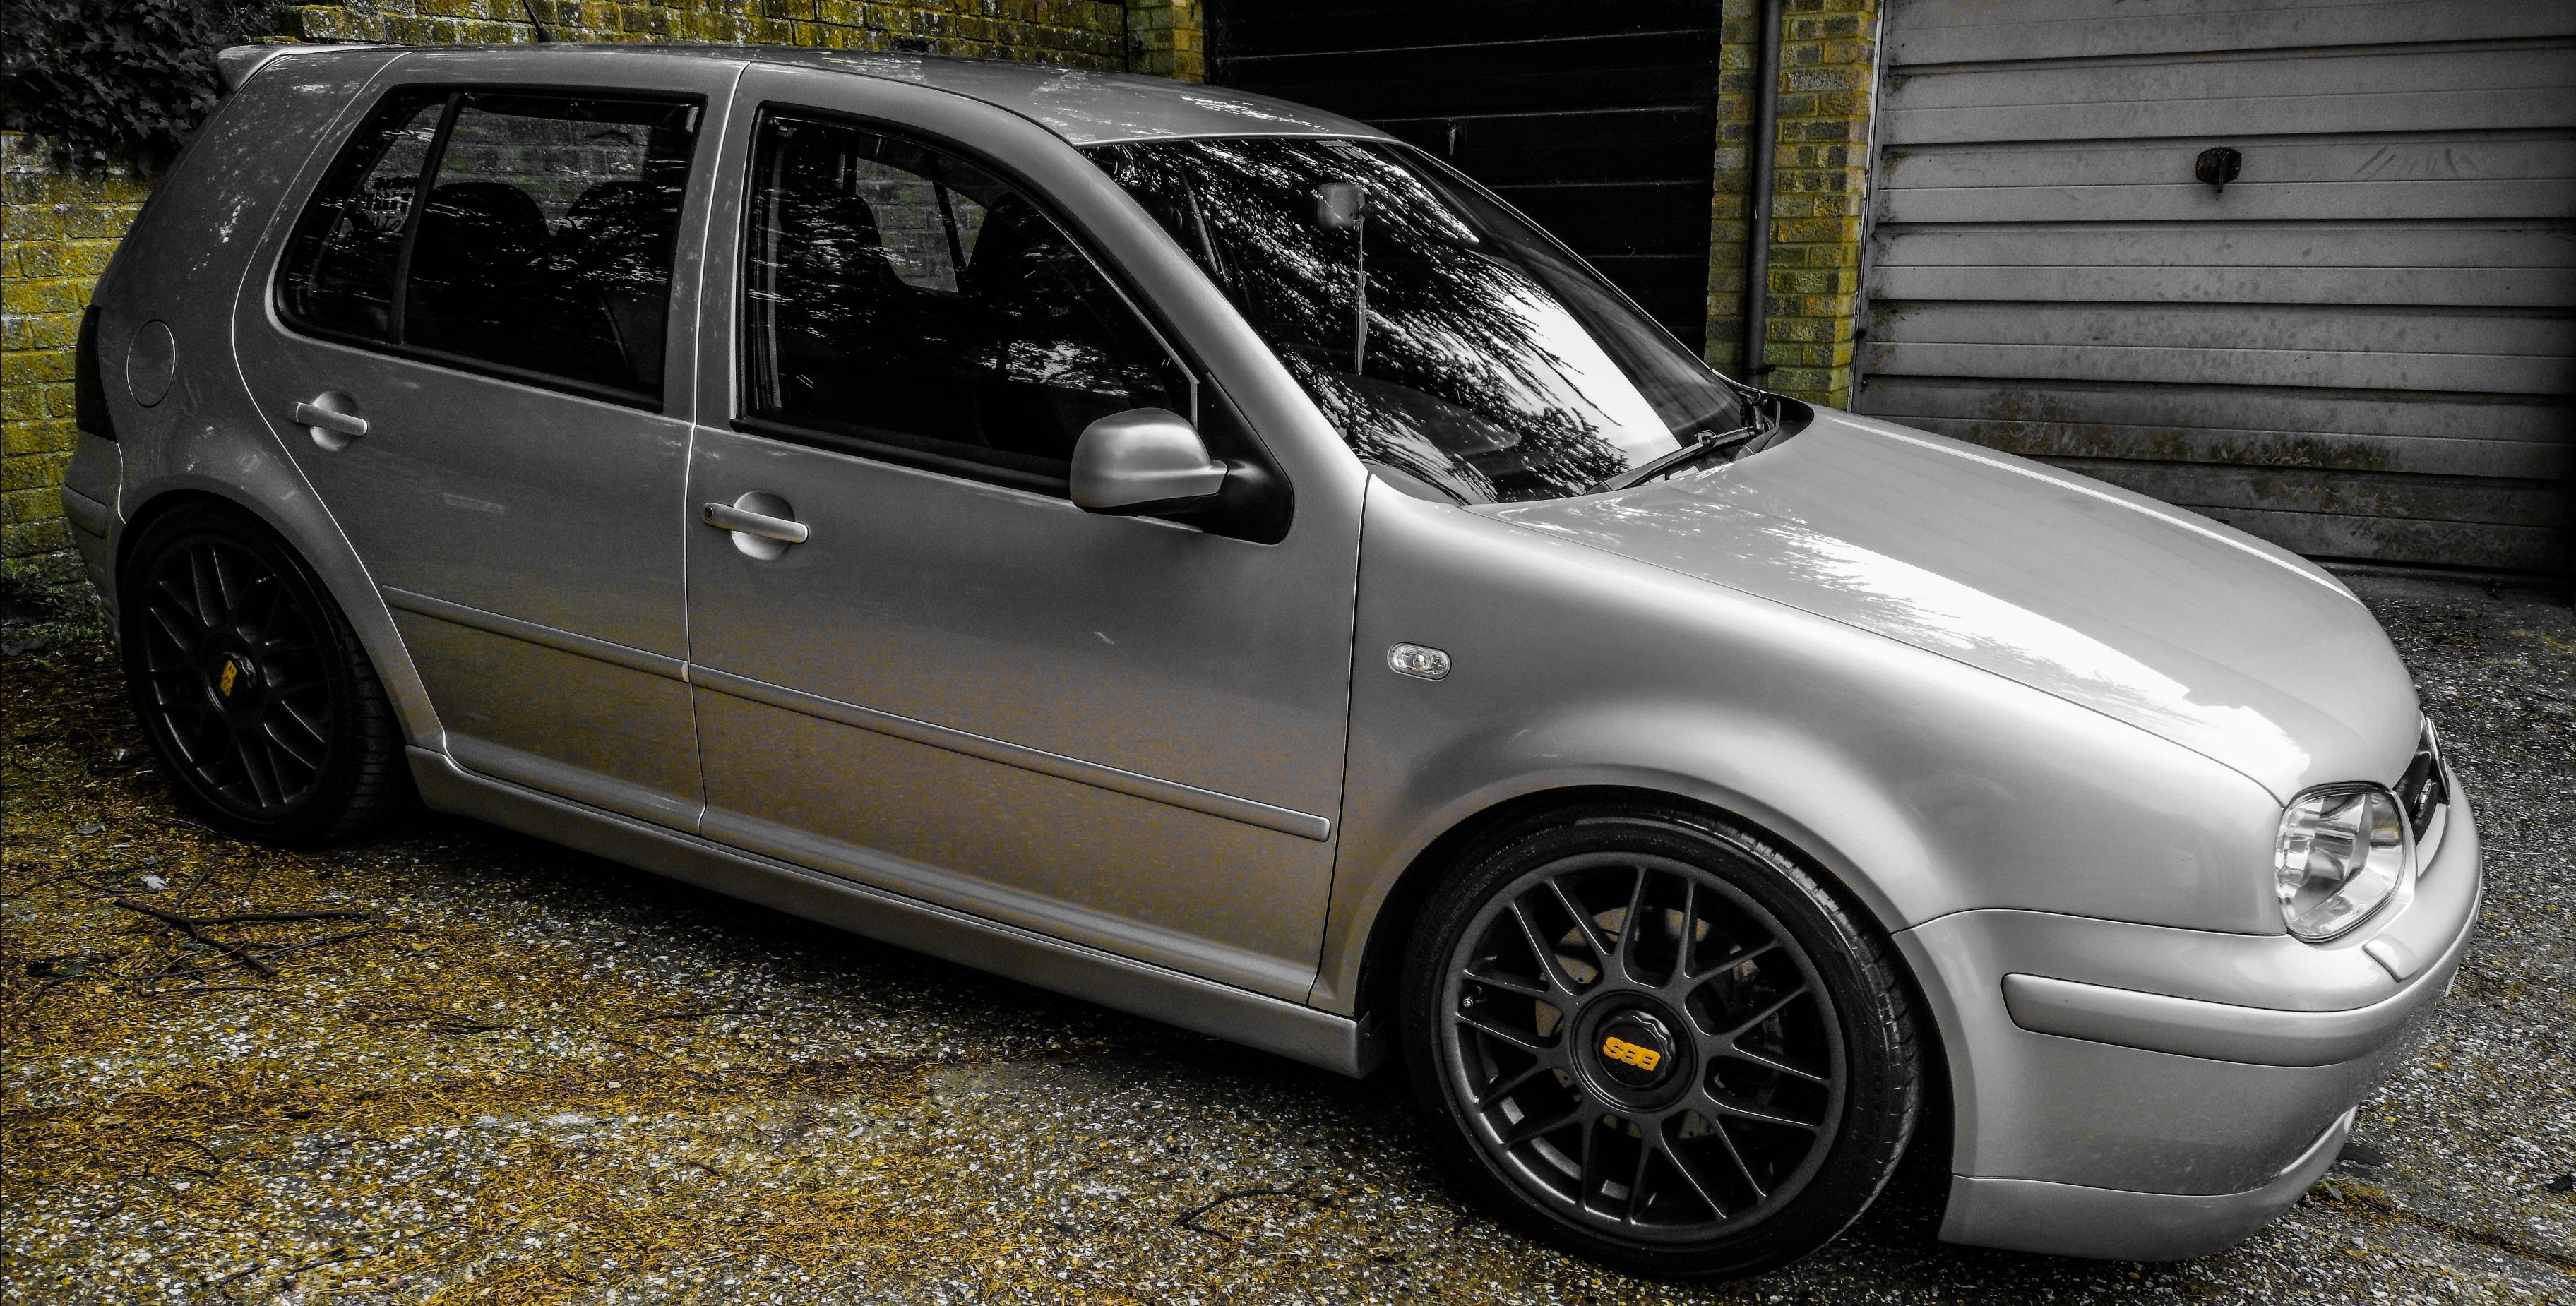 Golf MK4 1.8t - Page 24 - Readers' Cars - PistonHeads